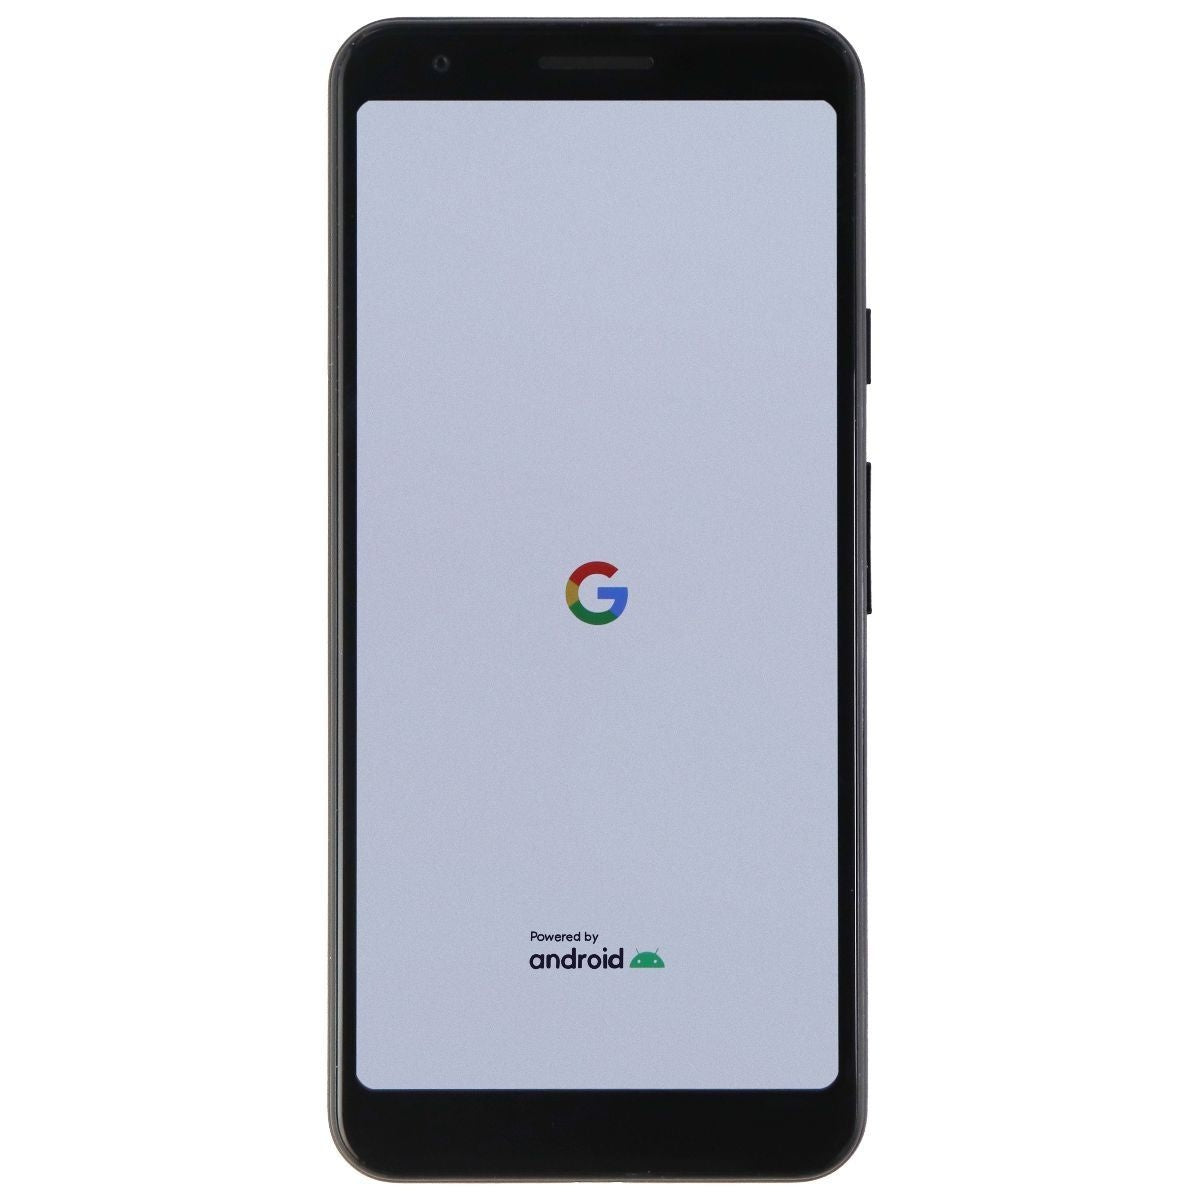 Google Pixel 3a (5.6-inch) Smartphone (G020G) UNLOCKED - 64GB / Just Black Cell Phones & Smartphones Google    - Simple Cell Bulk Wholesale Pricing - USA Seller